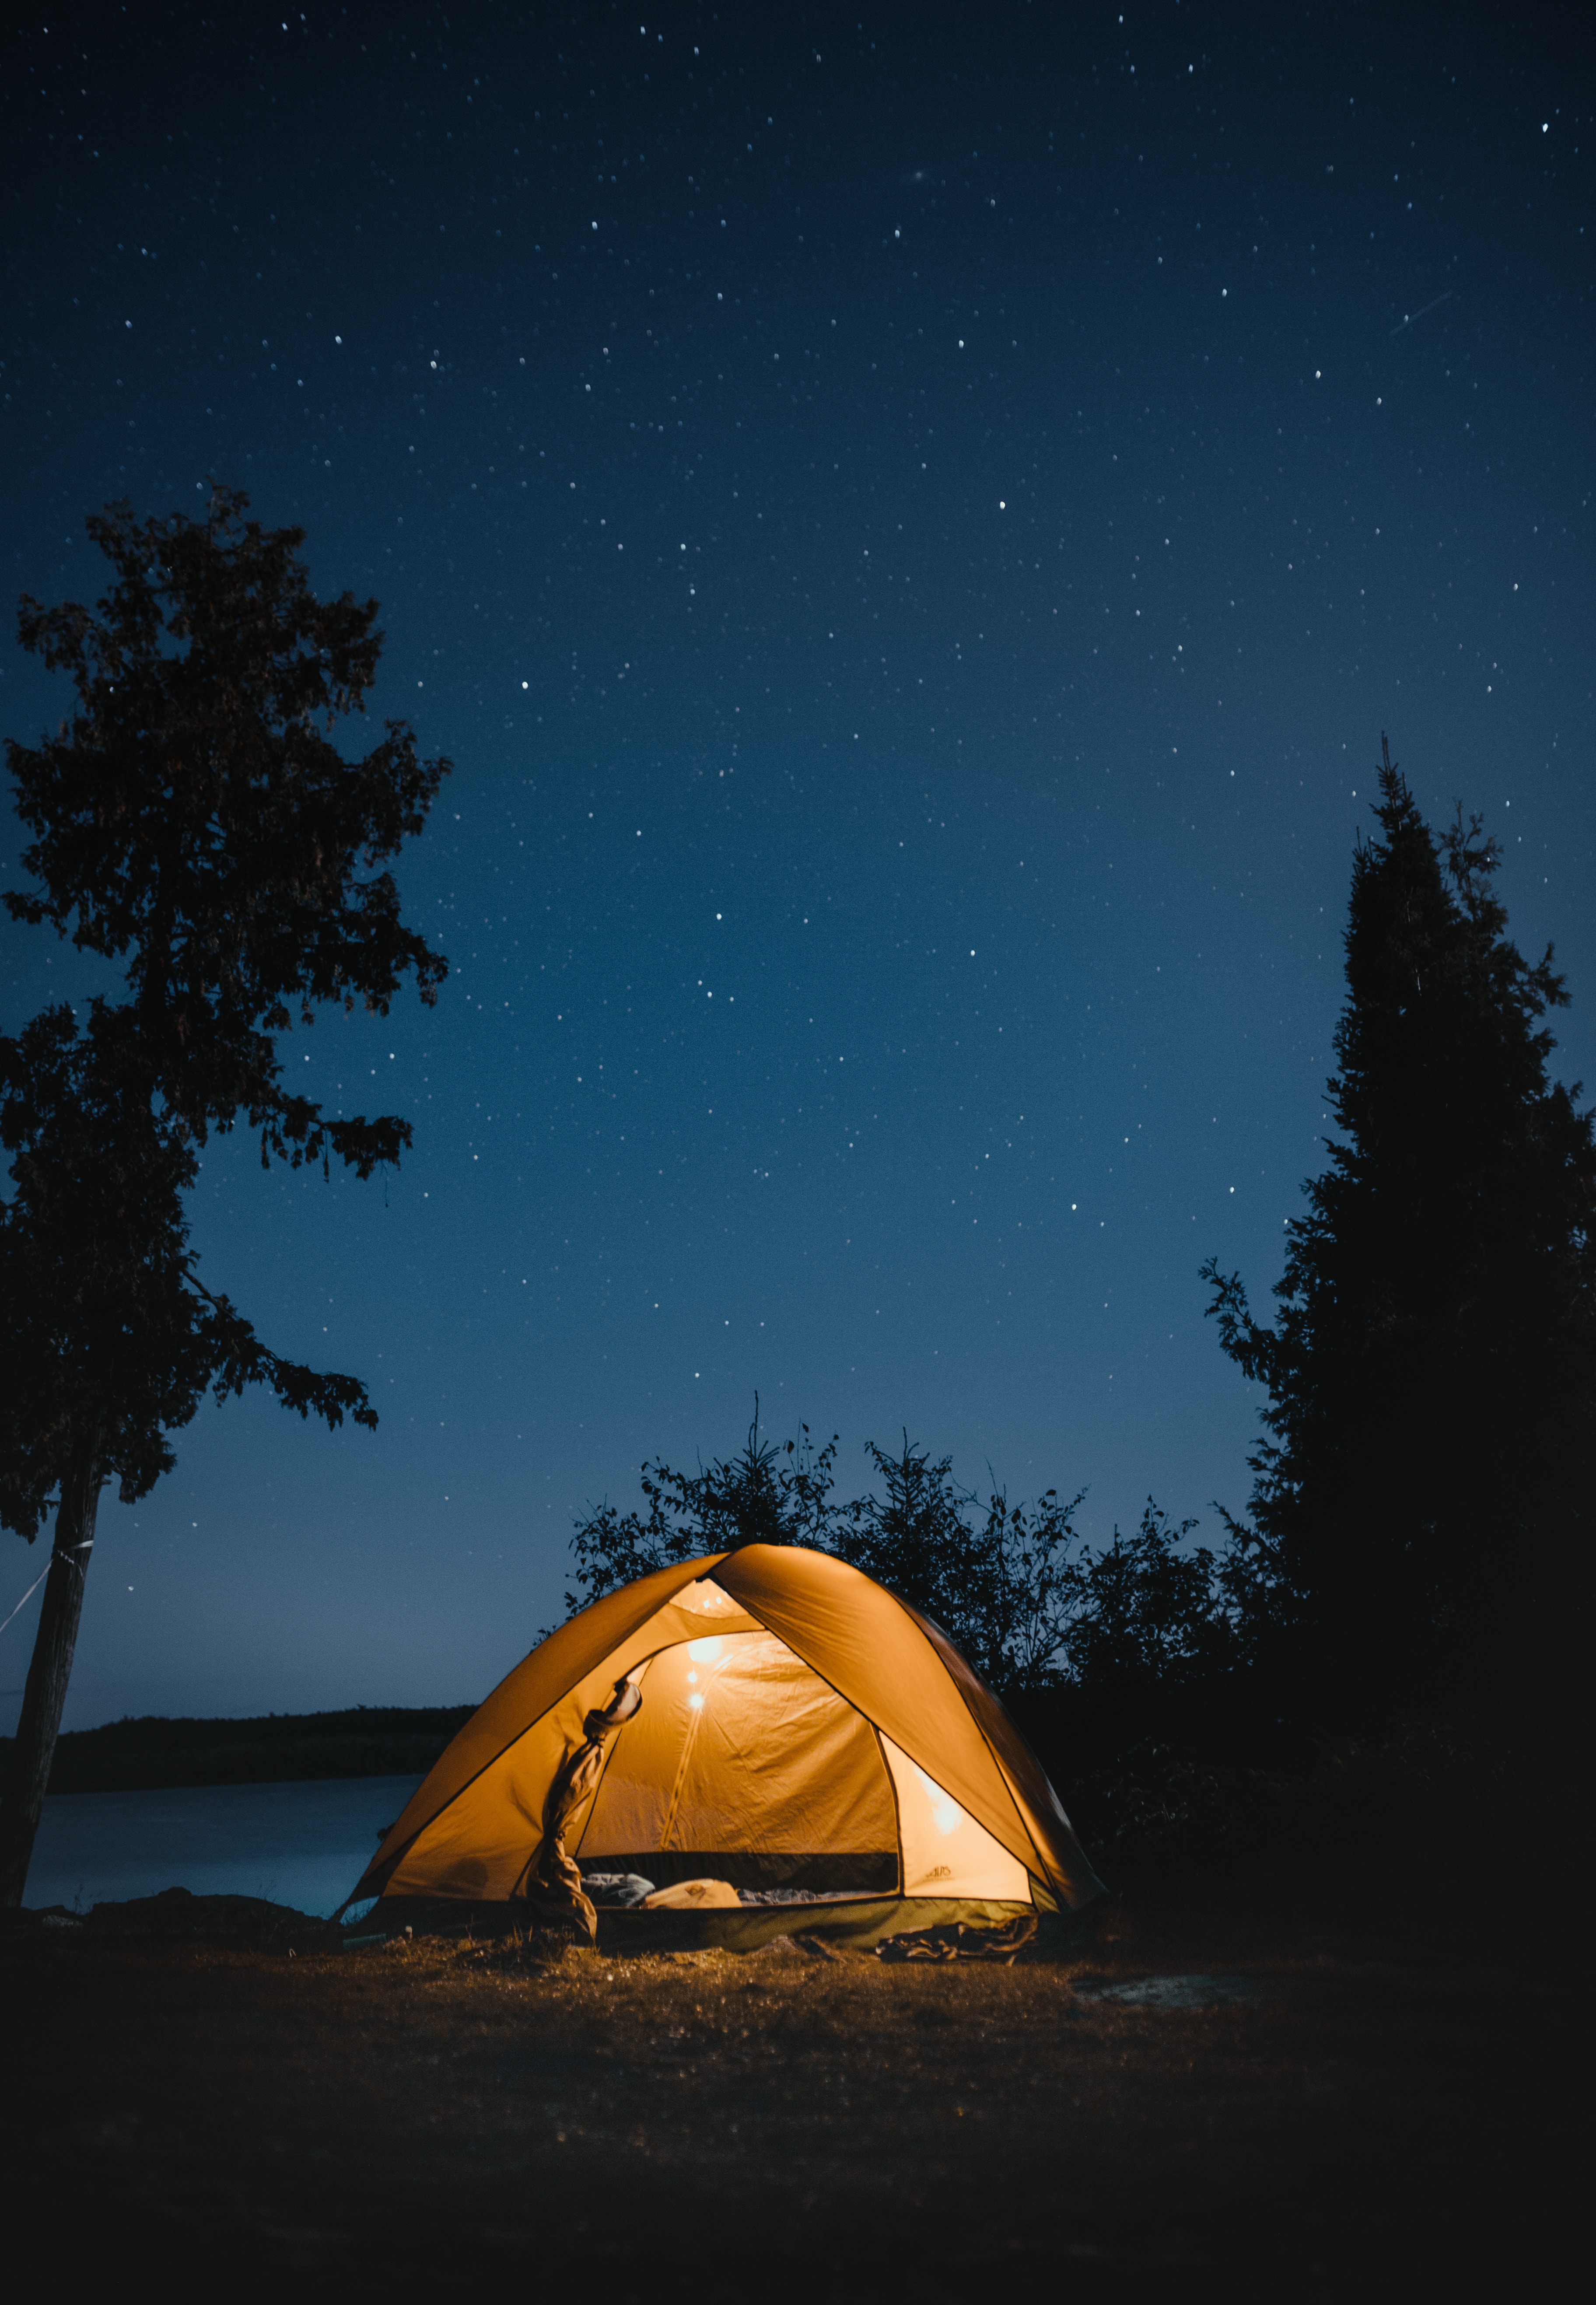 tent, camping, campsite, starry sky, nature, night, journey